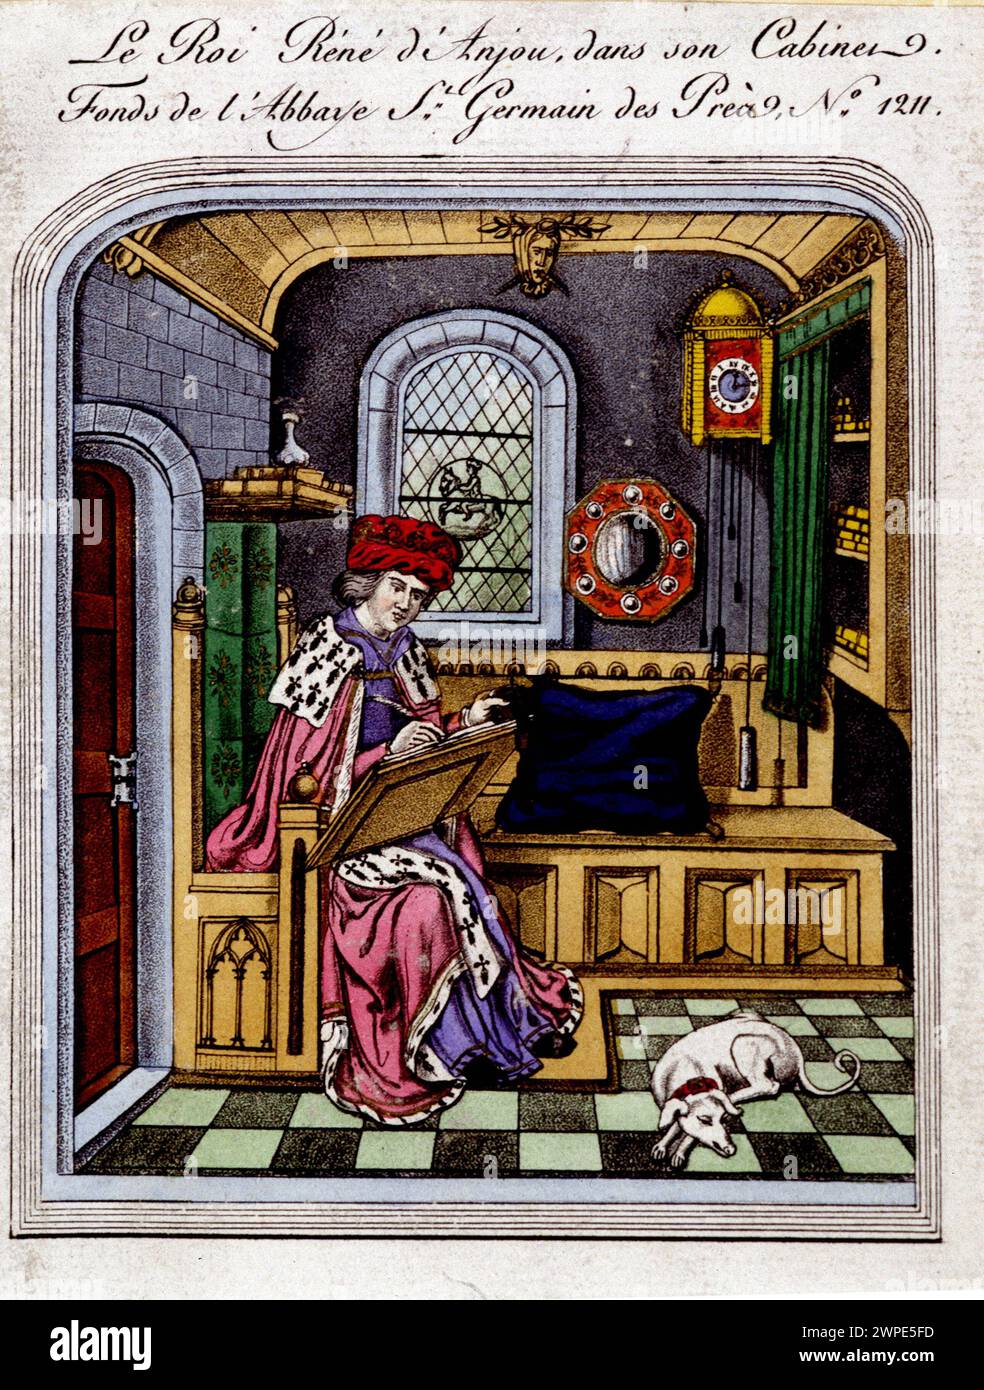 Portrait of King Rene of Anjou (1409-1480) 'also called Rene I of Naples or Rene de Sicile, in his cabinet - engraving after a miniature, 15th century Stock Photo